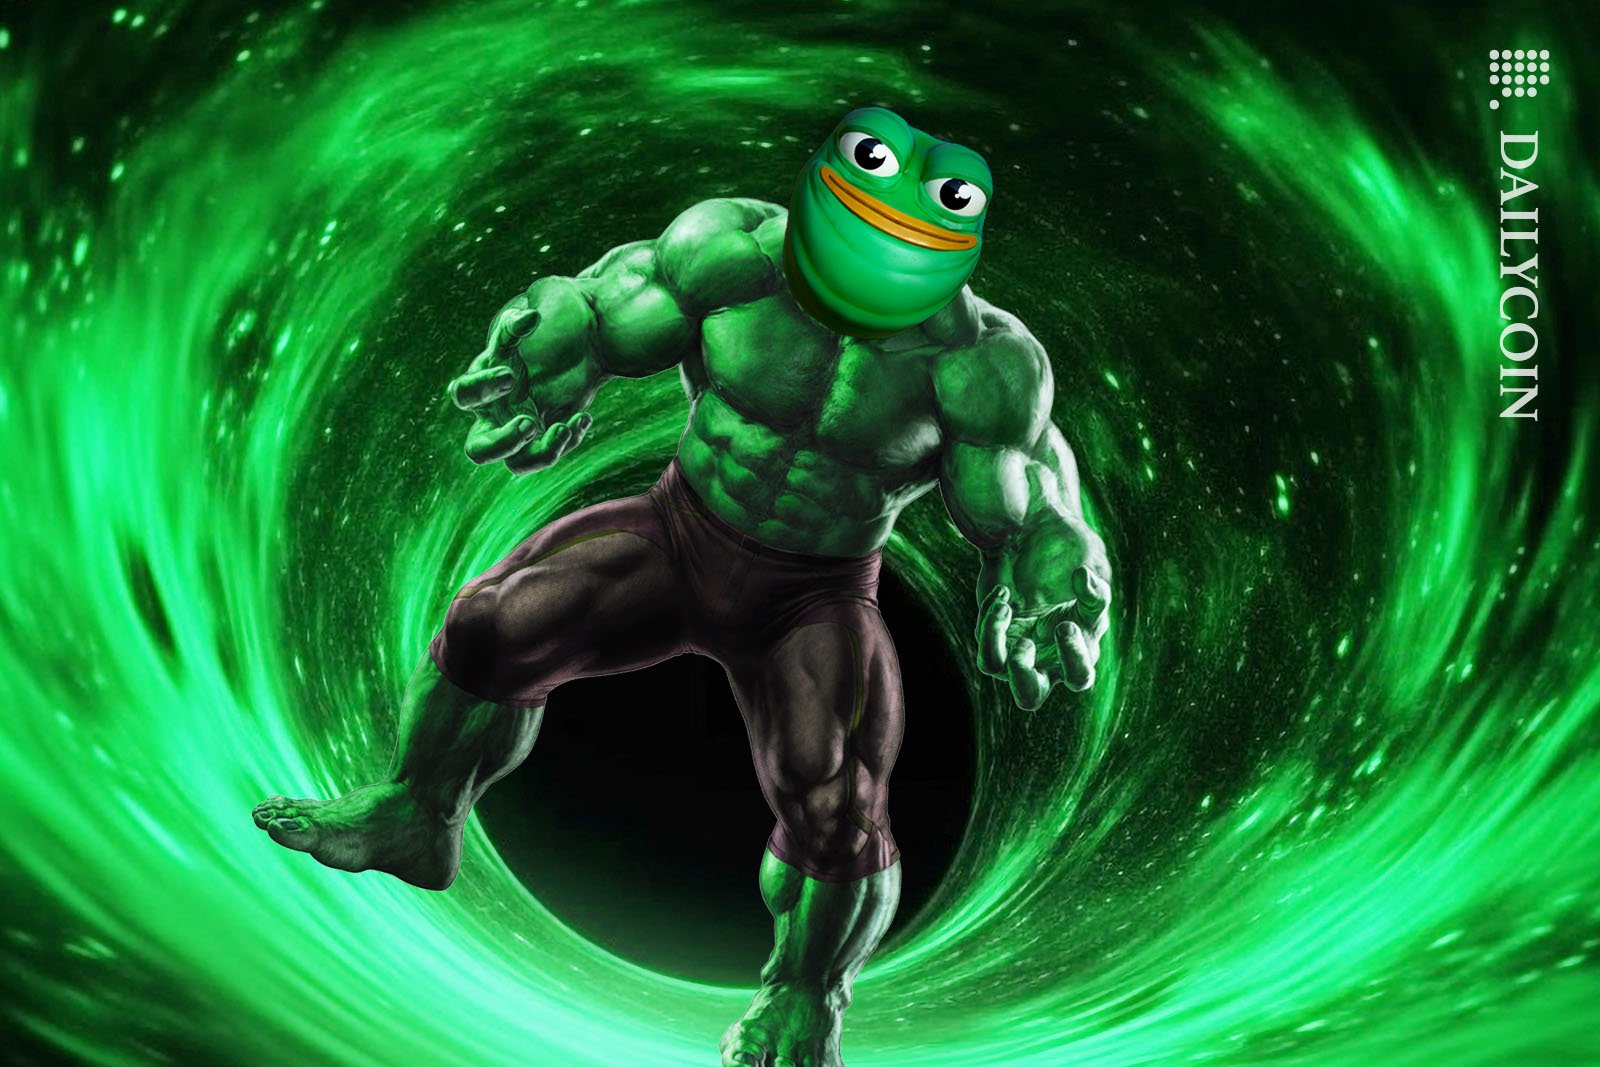 PEPE is strong as the Hulk in a green fire circle.